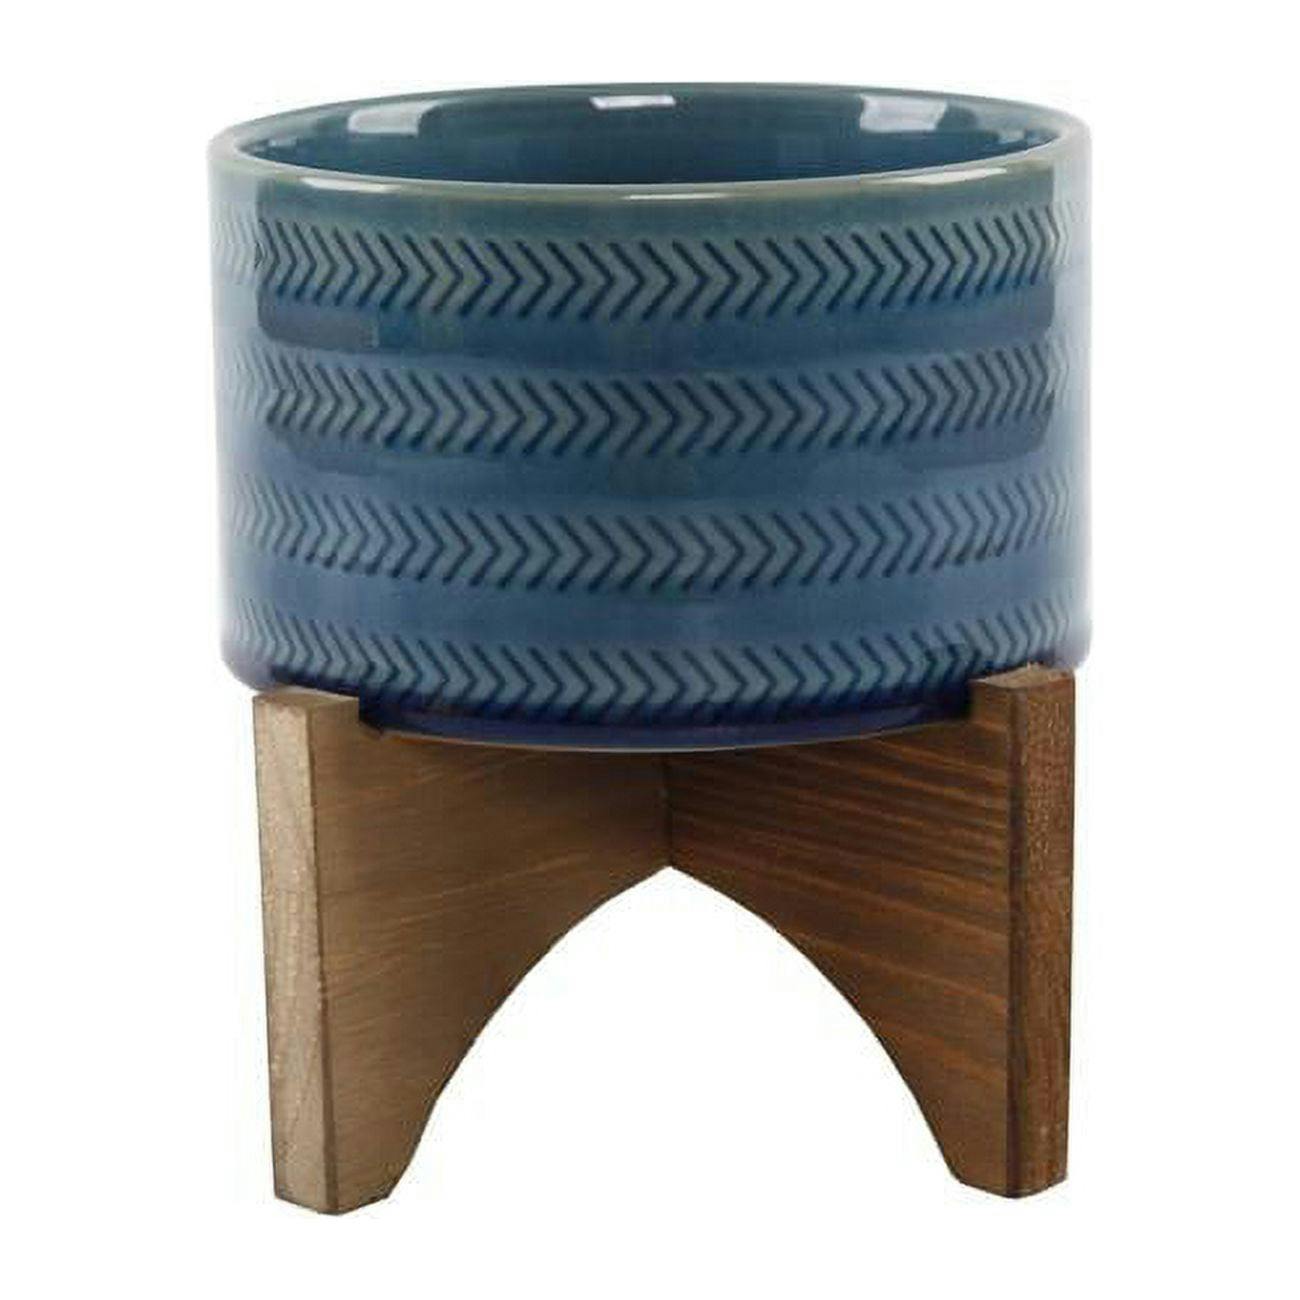 Mayan Teal Glass 6'' Ceramic Planter on Wooden Stand